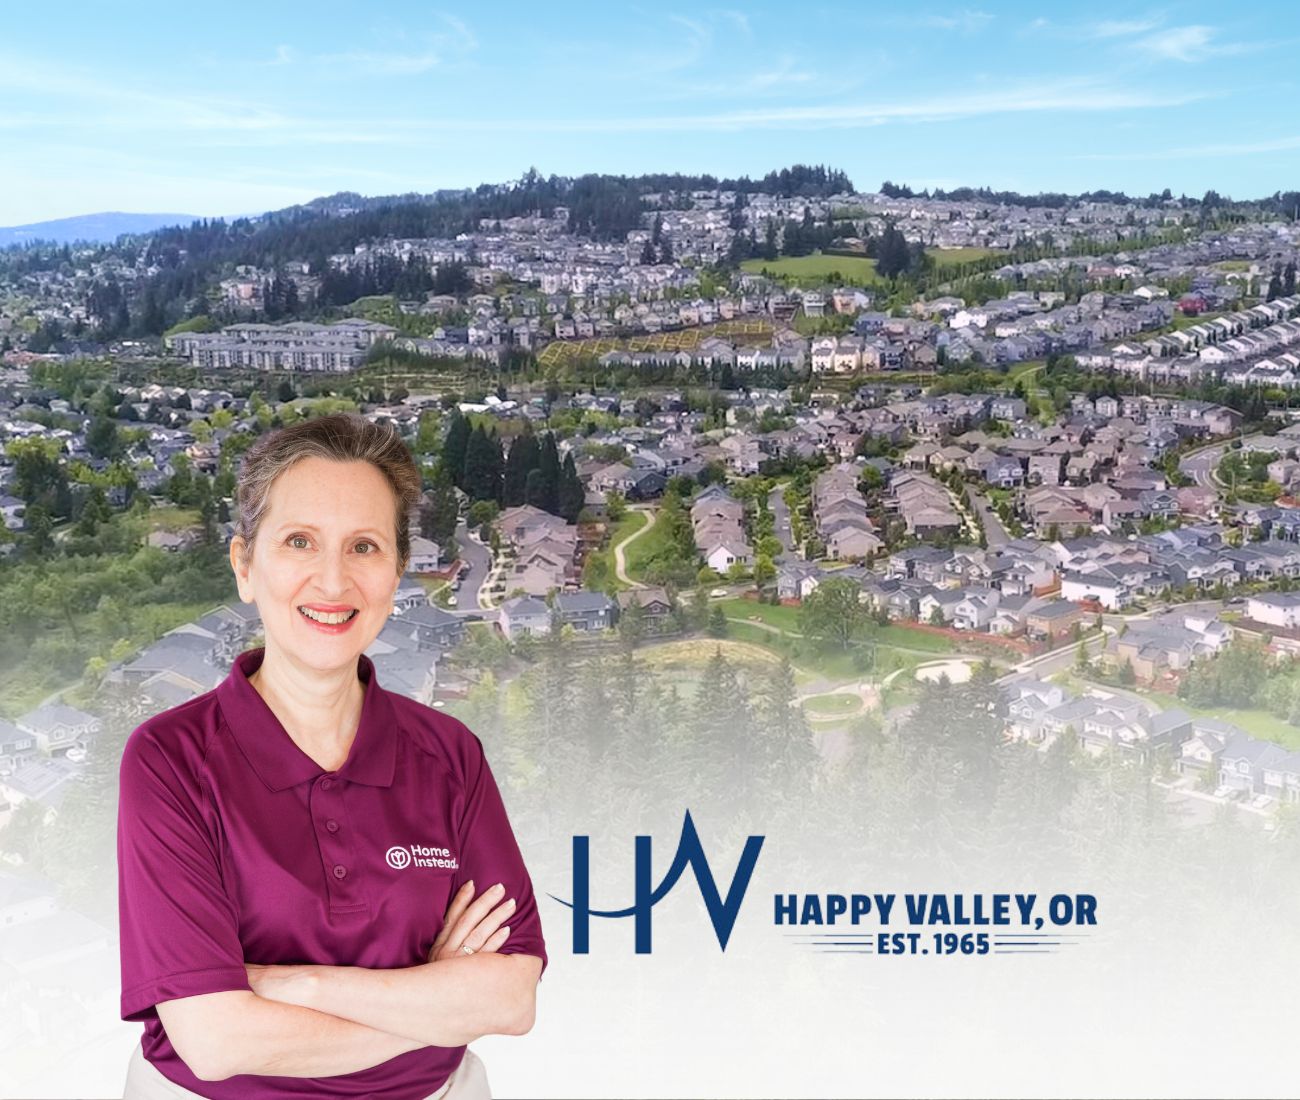 Home Instead caregiver with Happy Valley, Oregon in the background